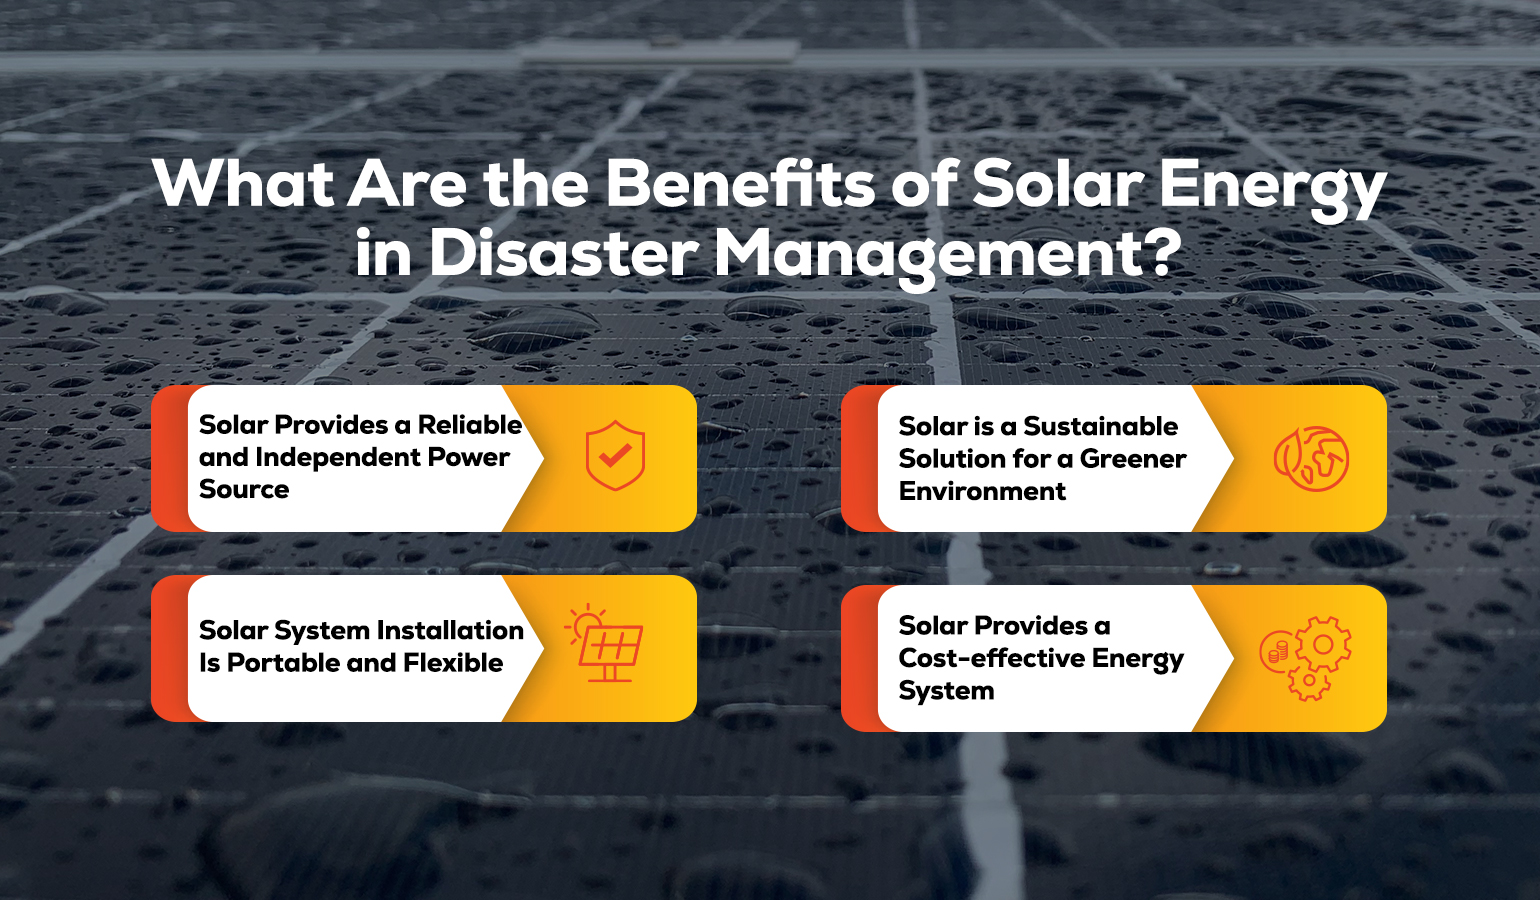 What Are the Benefits of Solar Energy in Disaster Management and Recovery? 